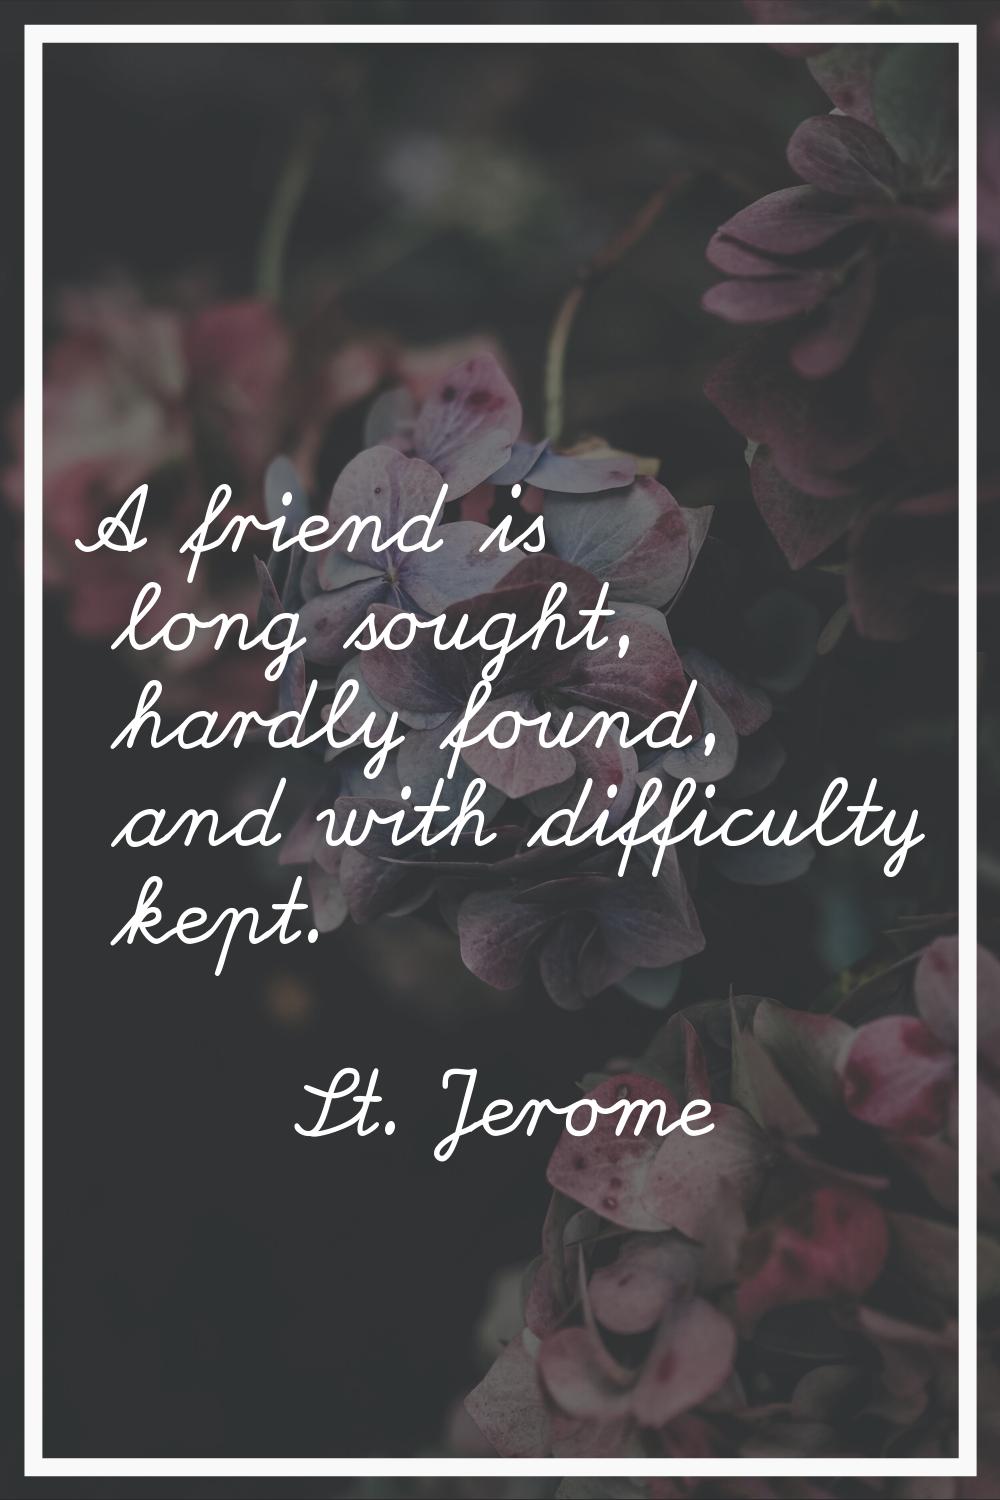 A friend is long sought, hardly found, and with difficulty kept.